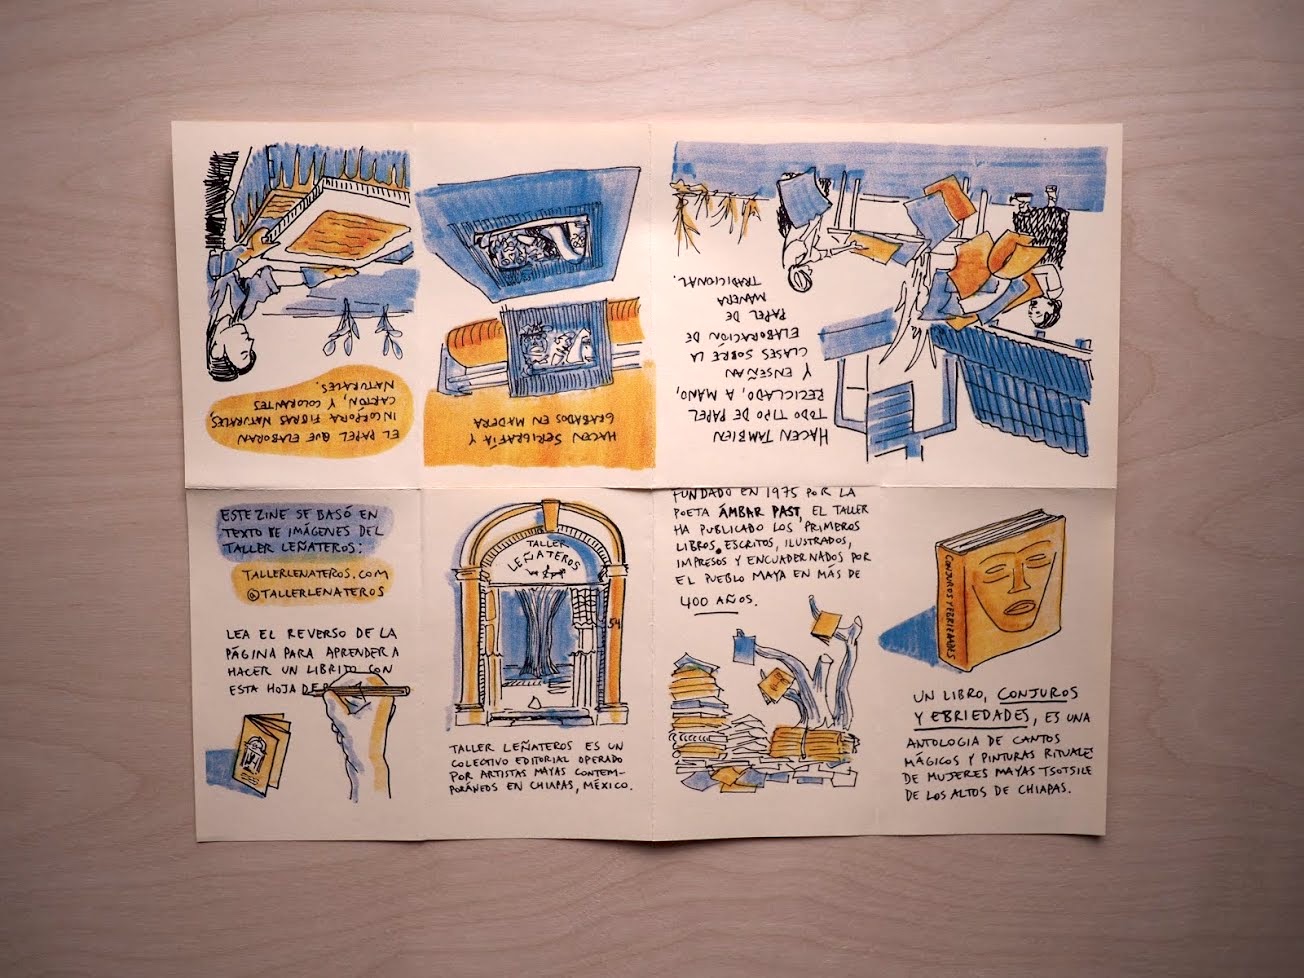 A letter-sized ivory colored page which is an unfolded zine with 8 illustrated pages, telling what Taller Leñateros is with images of a book with a face on the cover, a doorway, people holding piles of paper, and more, laying on a wooden table. 